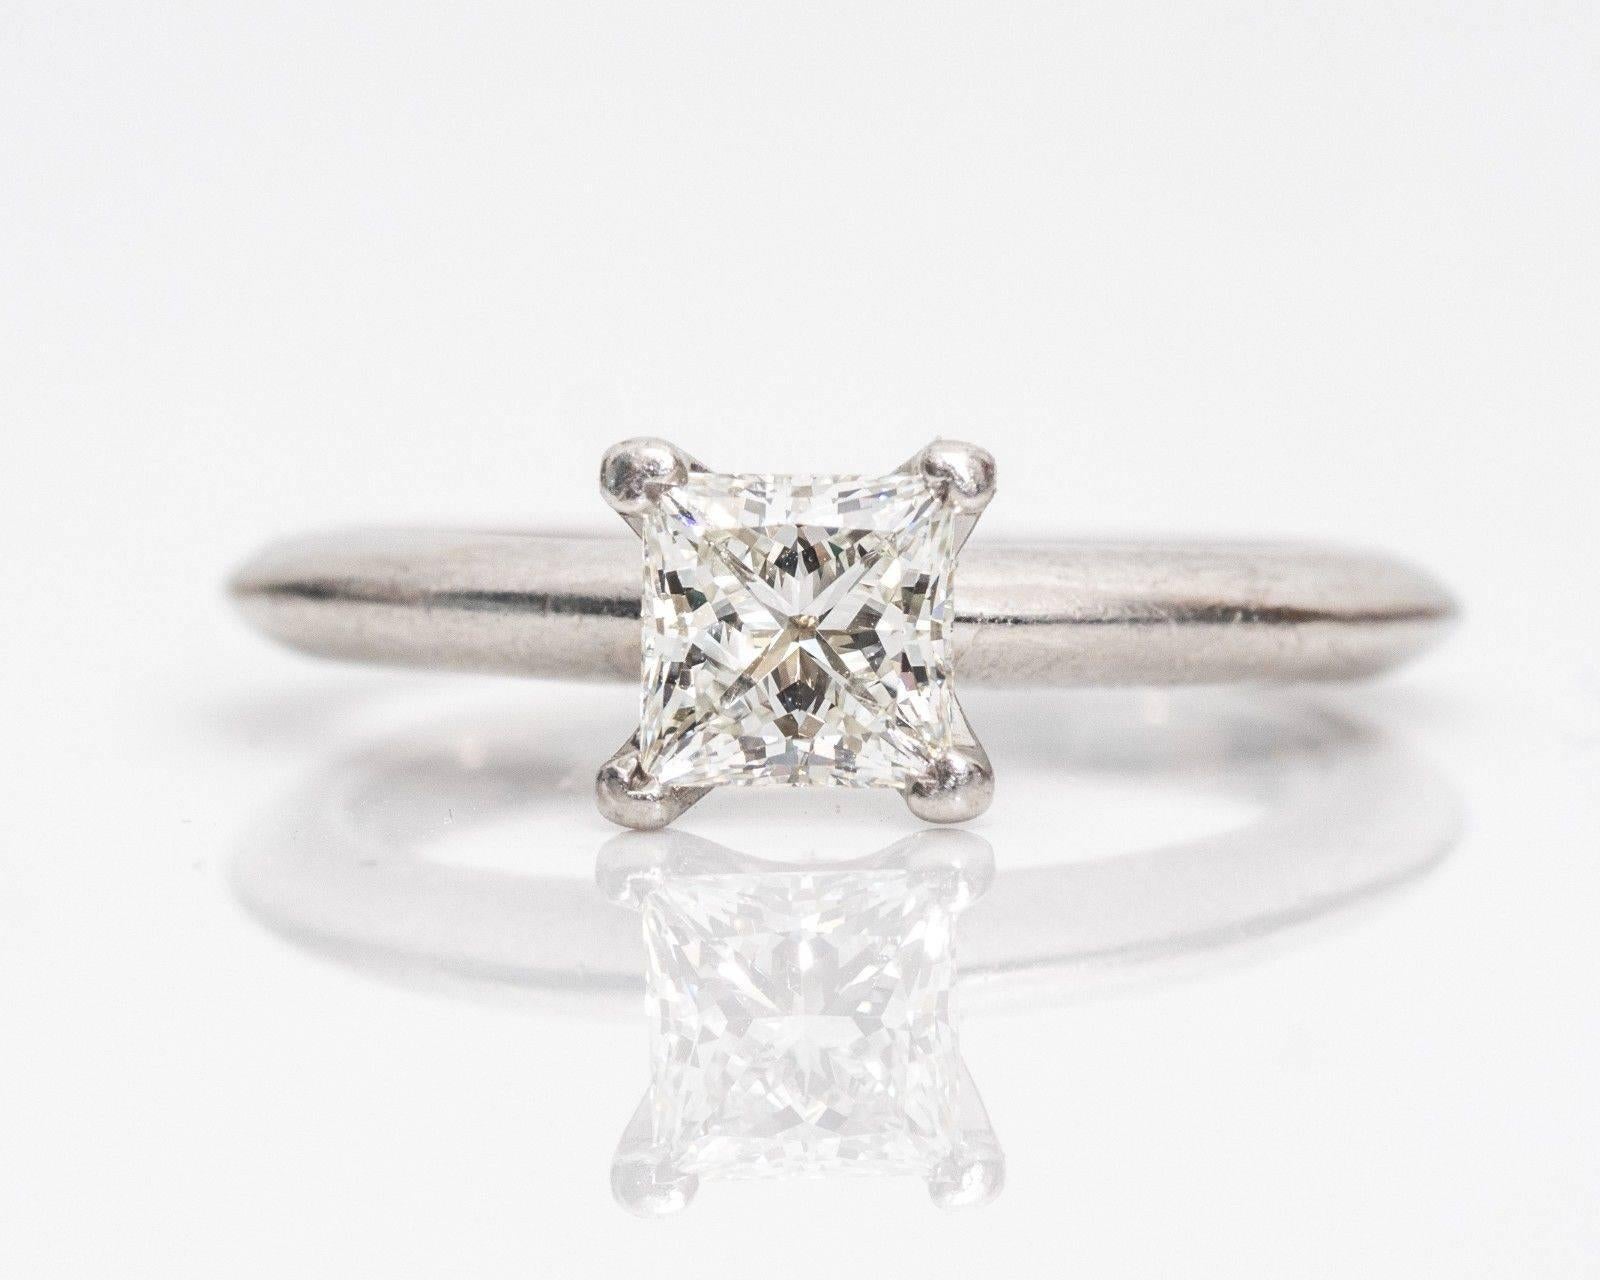 If it's true that simplicity is sophisticated, then this ring embodies elegance at its finest! The ring combines a princess cut shape but with the sparkle of a round brilliant stone. The square modified brilliant diamond with an excellent cut